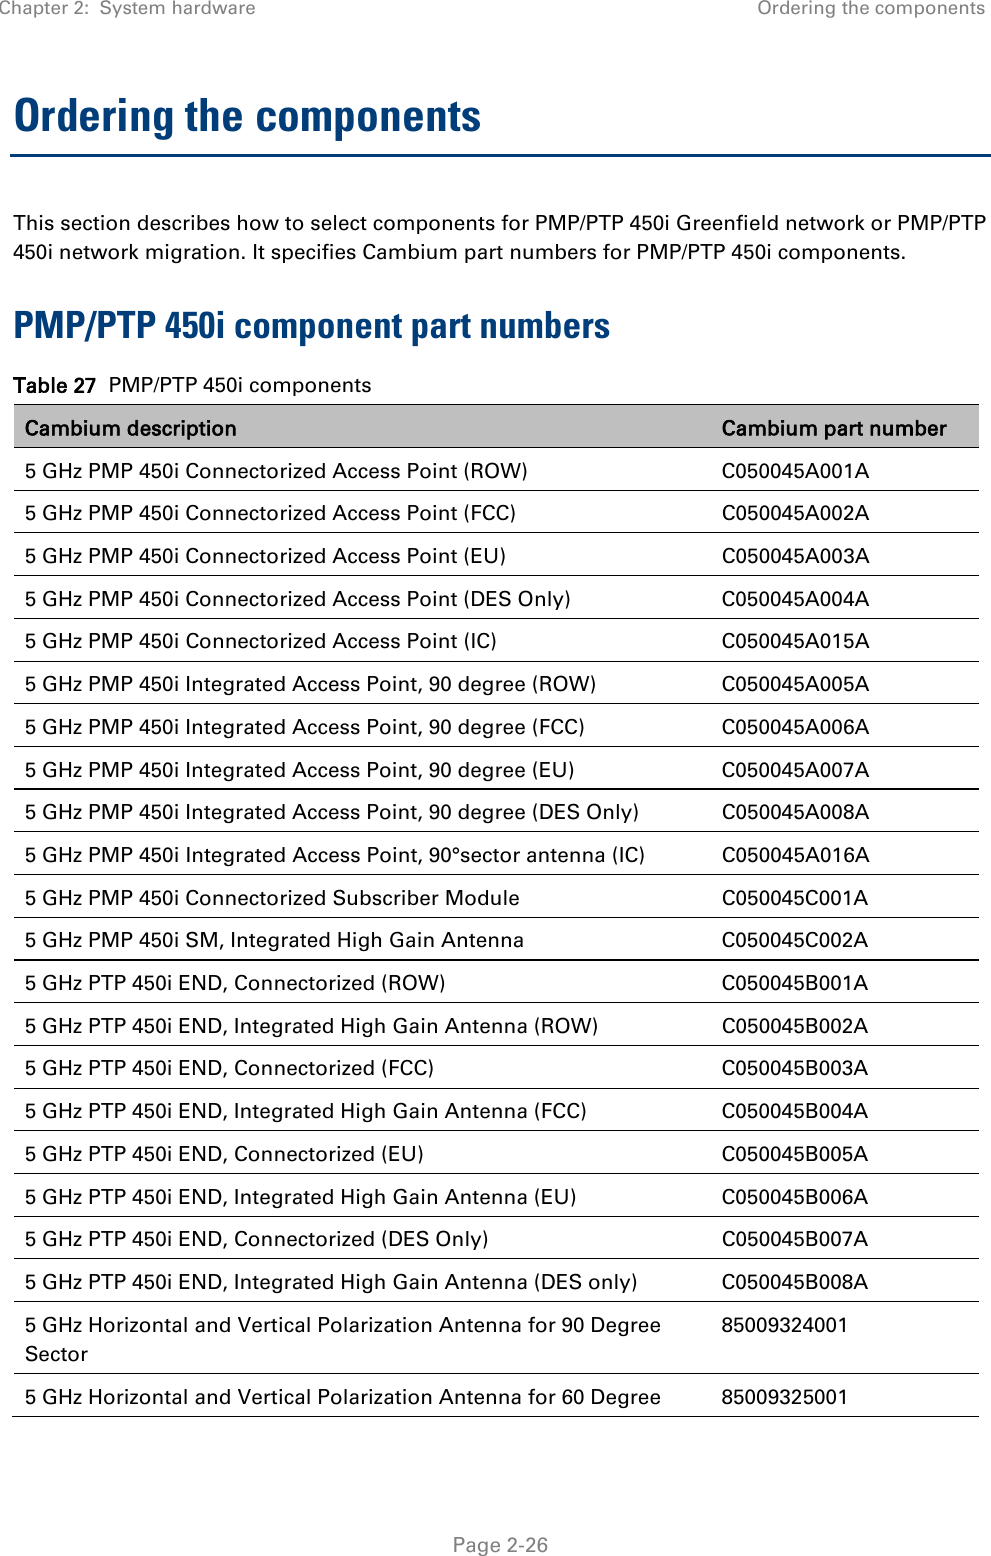 Chapter 2:  System hardware Ordering the components   Page 2-26 Ordering the components This section describes how to select components for PMP/PTP 450i Greenfield network or PMP/PTP 450i network migration. It specifies Cambium part numbers for PMP/PTP 450i components. PMP/PTP 450i component part numbers Table 27  PMP/PTP 450i components Cambium description Cambium part number 5 GHz PMP 450i Connectorized Access Point (ROW) C050045A001A 5 GHz PMP 450i Connectorized Access Point (FCC) C050045A002A 5 GHz PMP 450i Connectorized Access Point (EU) C050045A003A 5 GHz PMP 450i Connectorized Access Point (DES Only) C050045A004A 5 GHz PMP 450i Connectorized Access Point (IC) C050045A015A 5 GHz PMP 450i Integrated Access Point, 90 degree (ROW) C050045A005A 5 GHz PMP 450i Integrated Access Point, 90 degree (FCC)  C050045A006A 5 GHz PMP 450i Integrated Access Point, 90 degree (EU) C050045A007A 5 GHz PMP 450i Integrated Access Point, 90 degree (DES Only) C050045A008A 5 GHz PMP 450i Integrated Access Point, 90°sector antenna (IC) C050045A016A 5 GHz PMP 450i Connectorized Subscriber Module C050045C001A 5 GHz PMP 450i SM, Integrated High Gain Antenna C050045C002A 5 GHz PTP 450i END, Connectorized (ROW) C050045B001A 5 GHz PTP 450i END, Integrated High Gain Antenna (ROW) C050045B002A 5 GHz PTP 450i END, Connectorized (FCC) C050045B003A 5 GHz PTP 450i END, Integrated High Gain Antenna (FCC) C050045B004A 5 GHz PTP 450i END, Connectorized (EU) C050045B005A 5 GHz PTP 450i END, Integrated High Gain Antenna (EU) C050045B006A 5 GHz PTP 450i END, Connectorized (DES Only) C050045B007A 5 GHz PTP 450i END, Integrated High Gain Antenna (DES only) C050045B008A 5 GHz Horizontal and Vertical Polarization Antenna for 90 Degree Sector 85009324001 5 GHz Horizontal and Vertical Polarization Antenna for 60 Degree  85009325001 